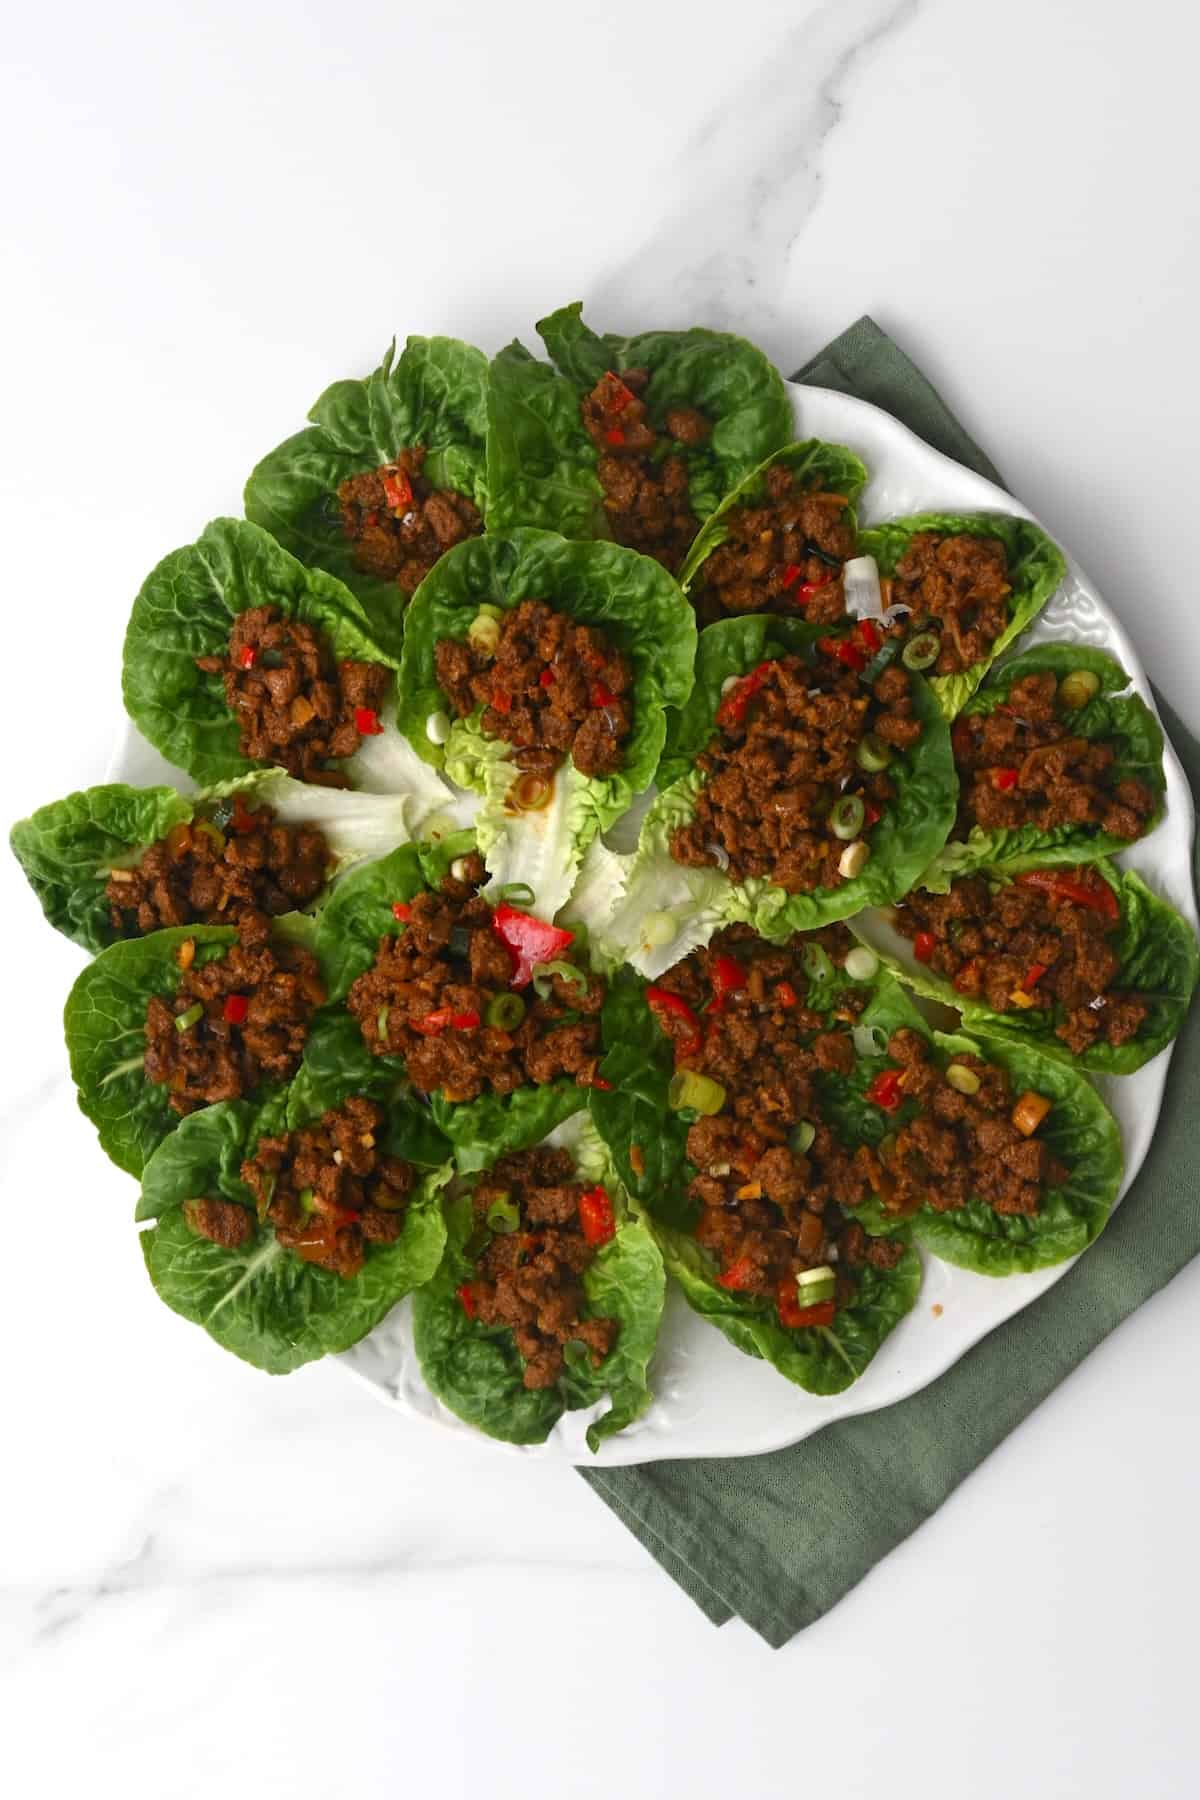 A plate with lettuce wraps on it